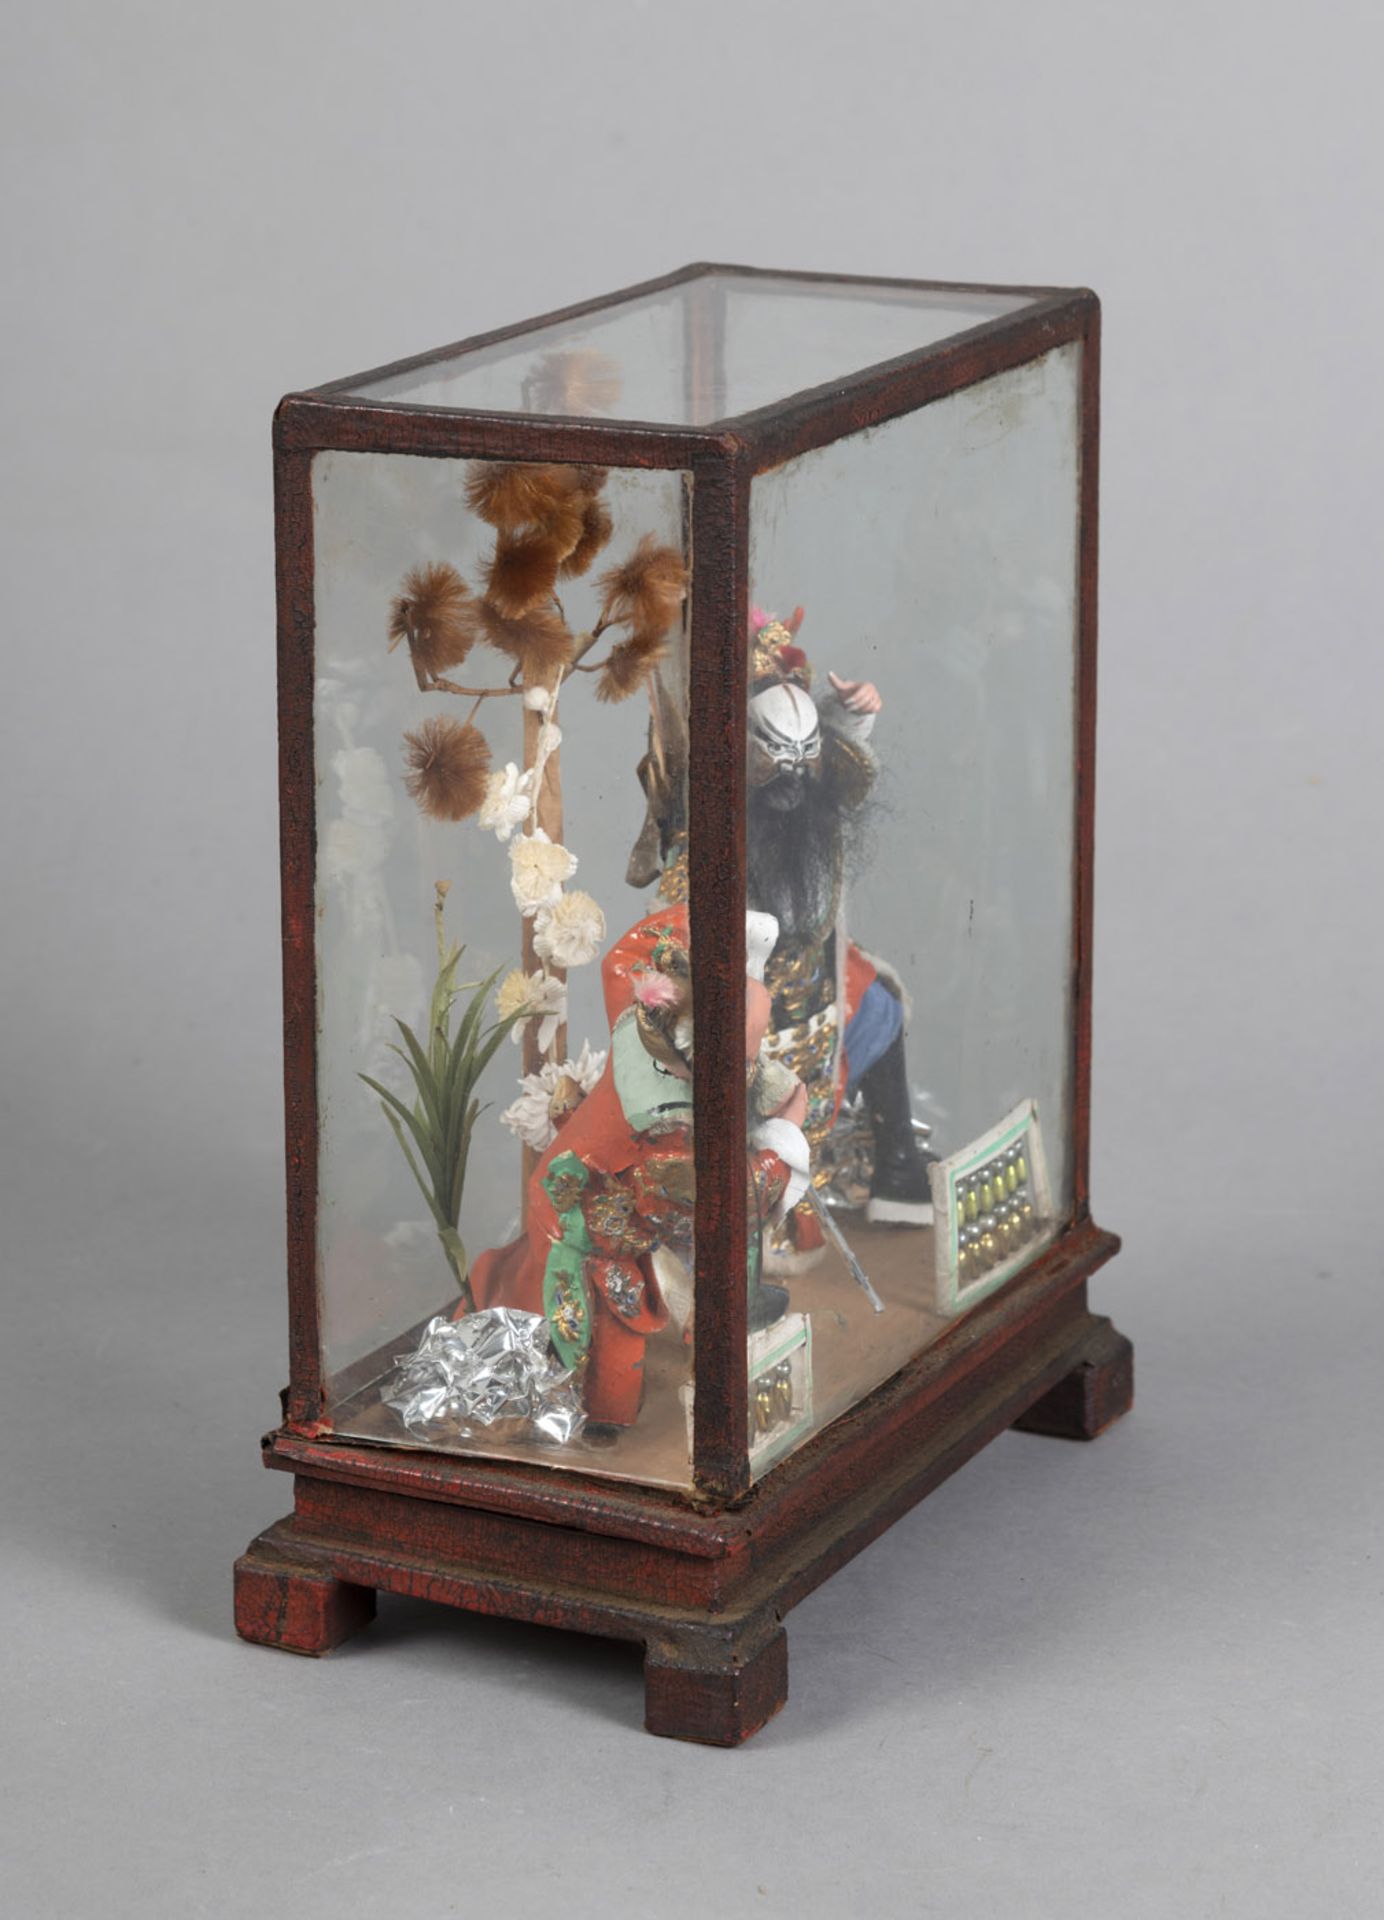 A GLASS SHOWCASE WITH TWO PAINTED CERAMICS PEKING OPERA FIGURES - Image 2 of 3